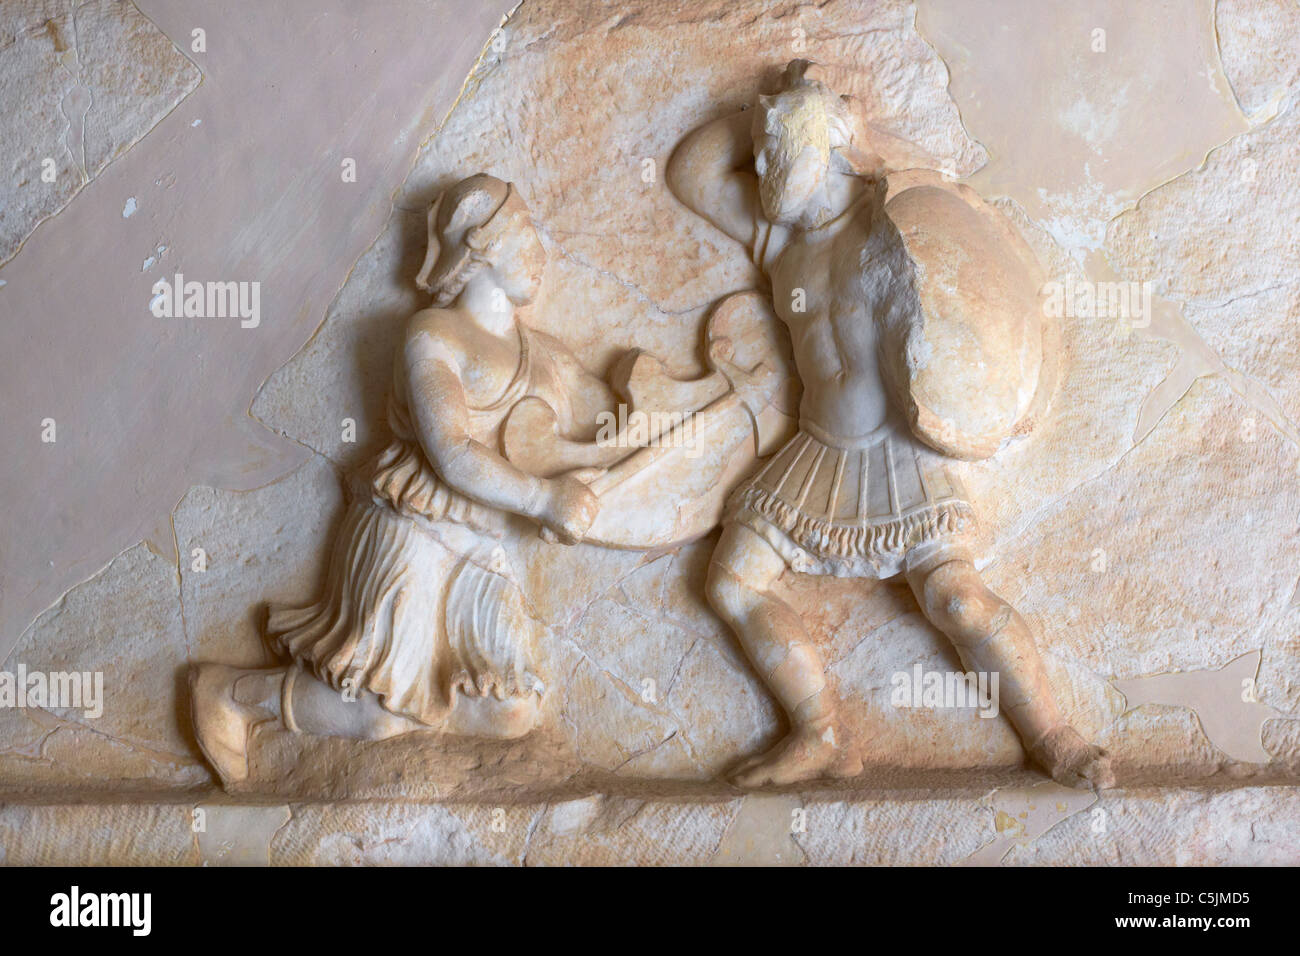 Archeological finds in the museum of ancient city of Corinth, Greec Stock Photo